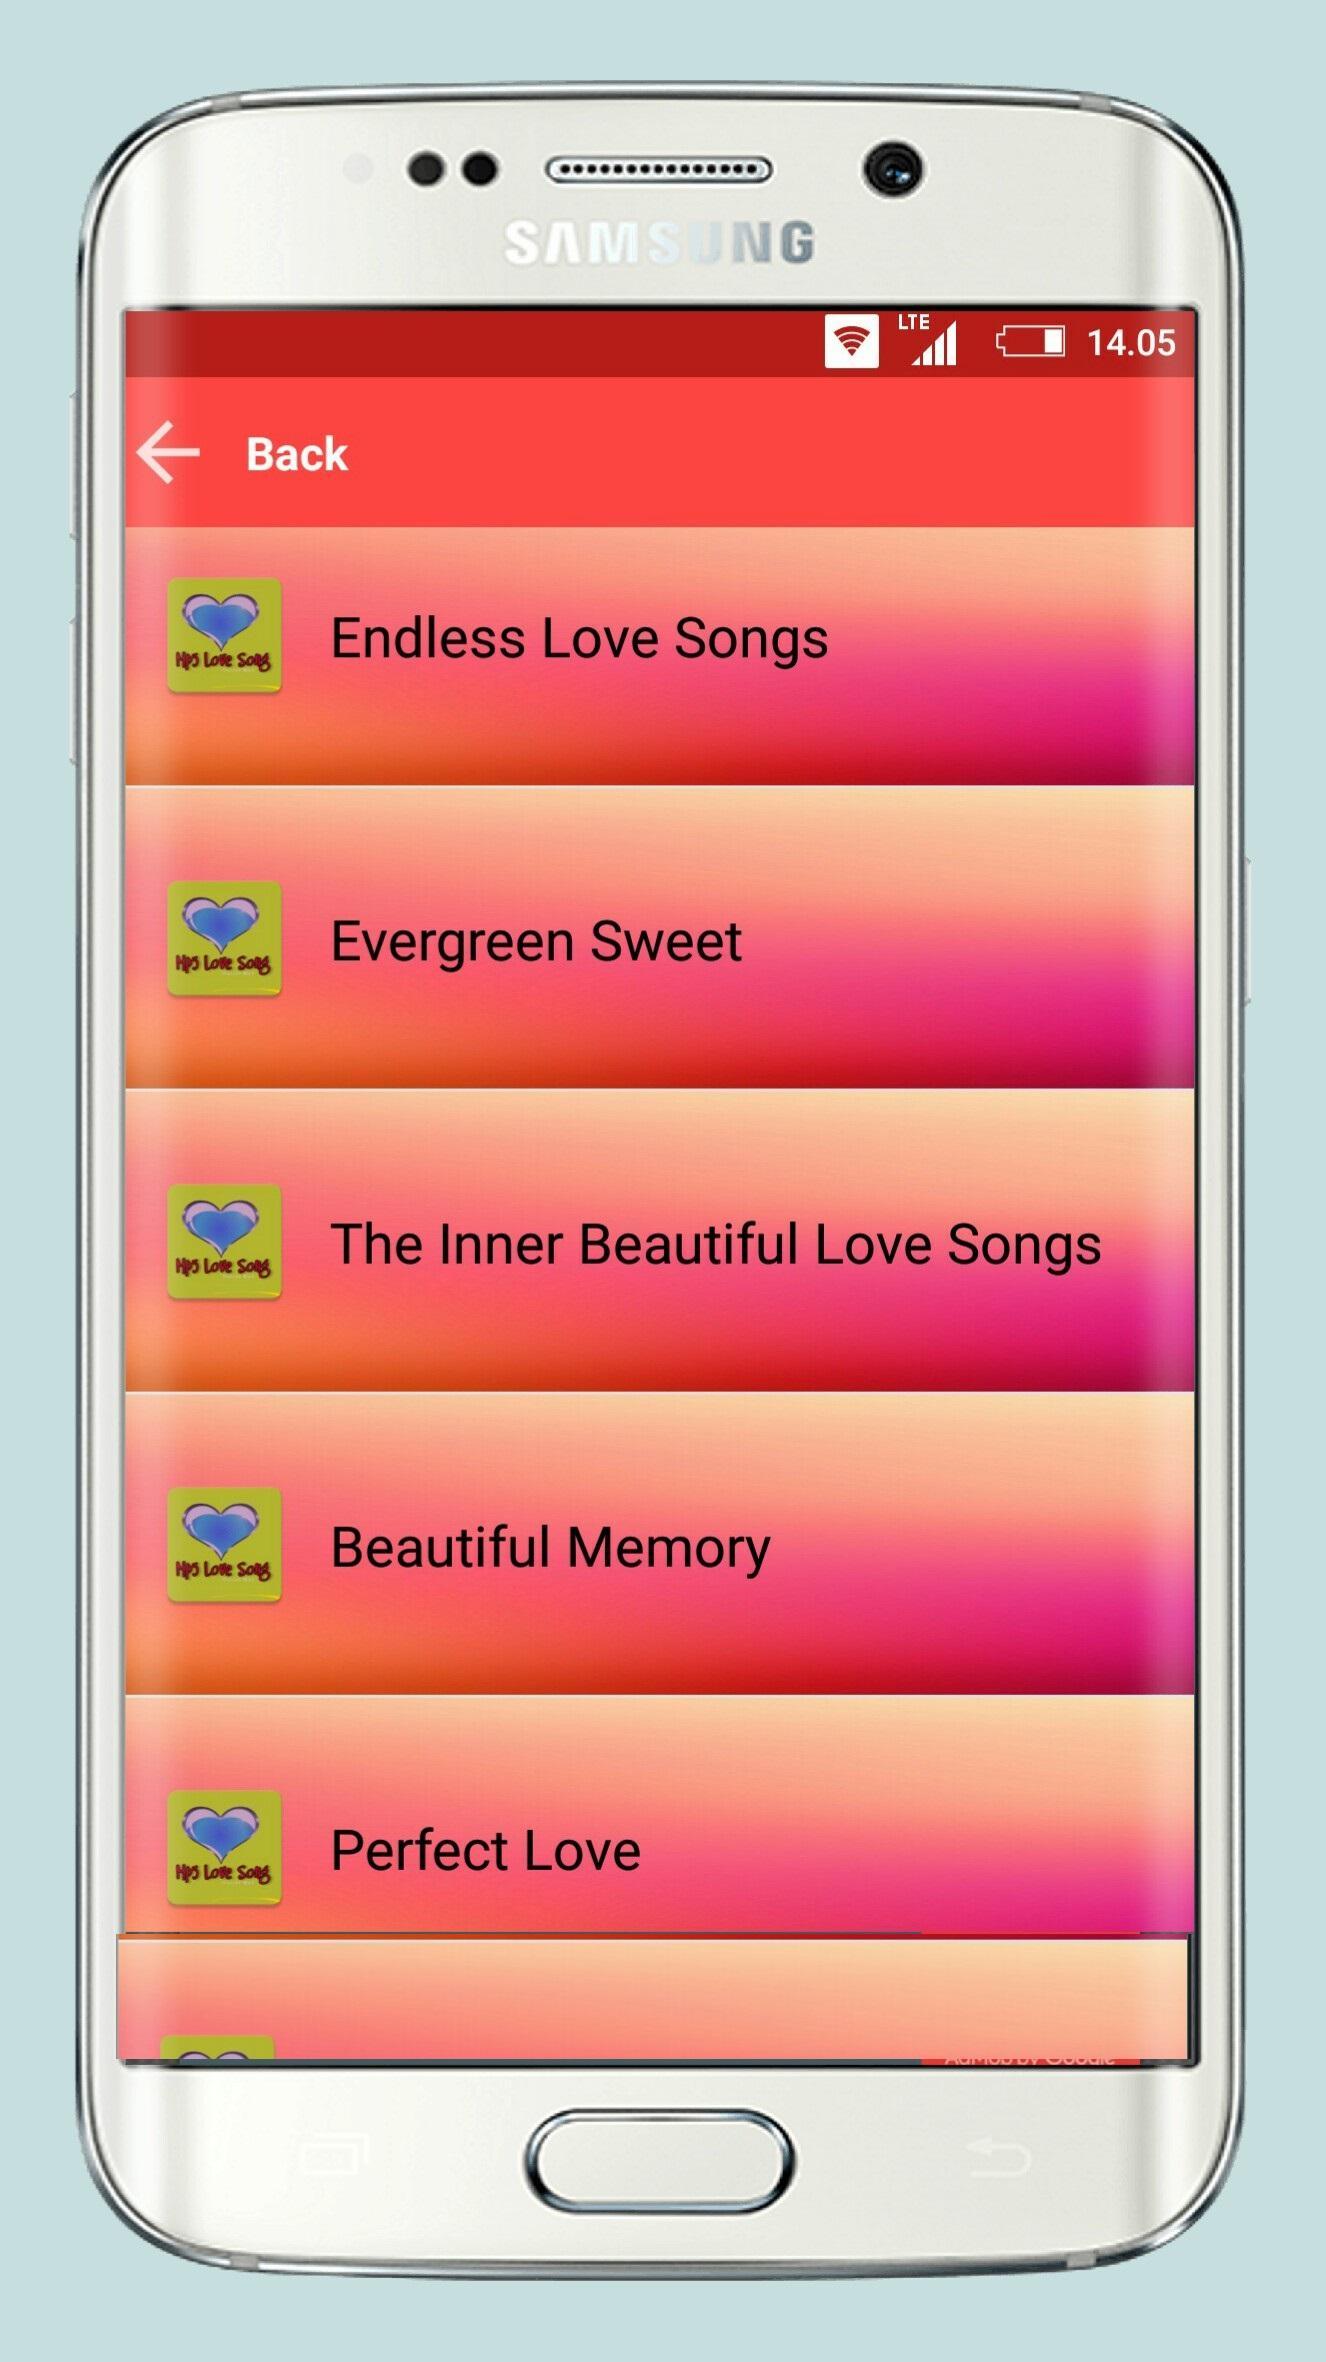 Secret Love Song for Android - APK Download